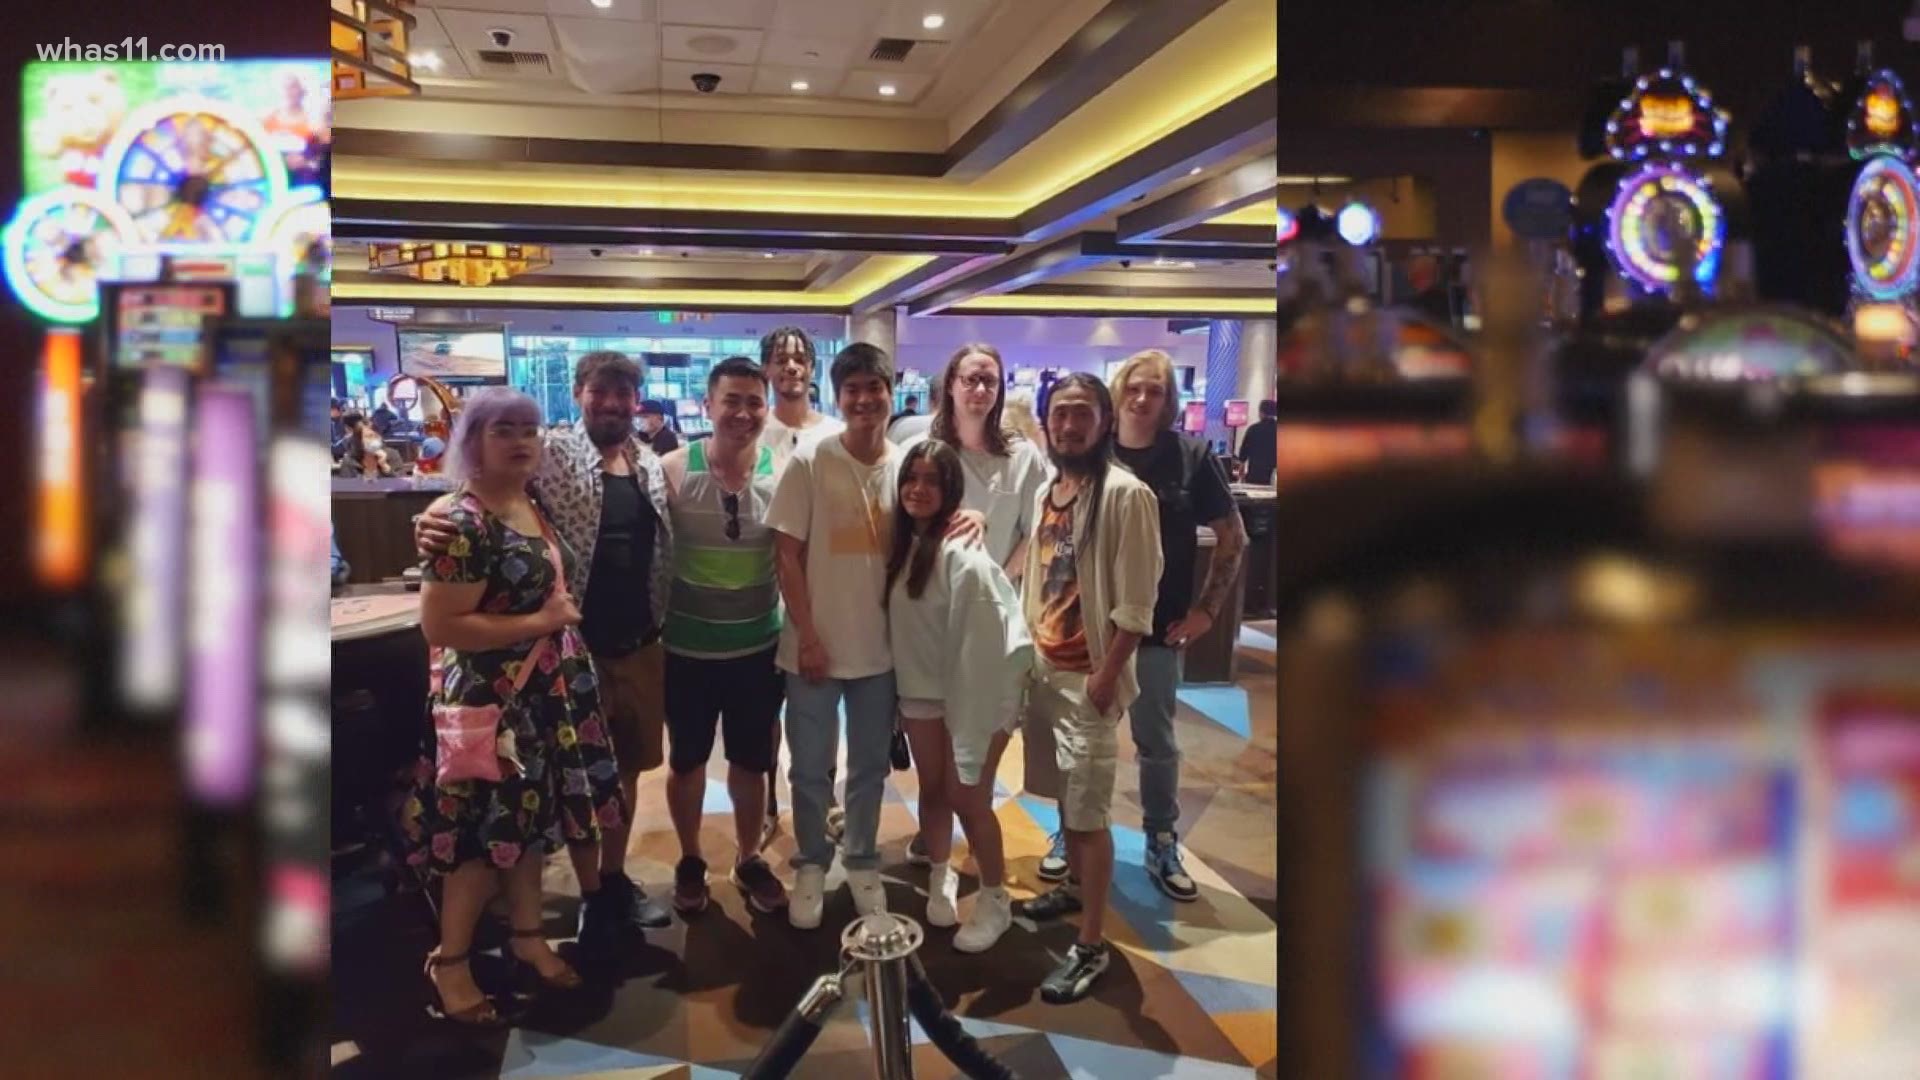 After an unusual year and lots of hard work, Ramen House owner Jonathan Ham treated his employees with a trip to Las Vegas.